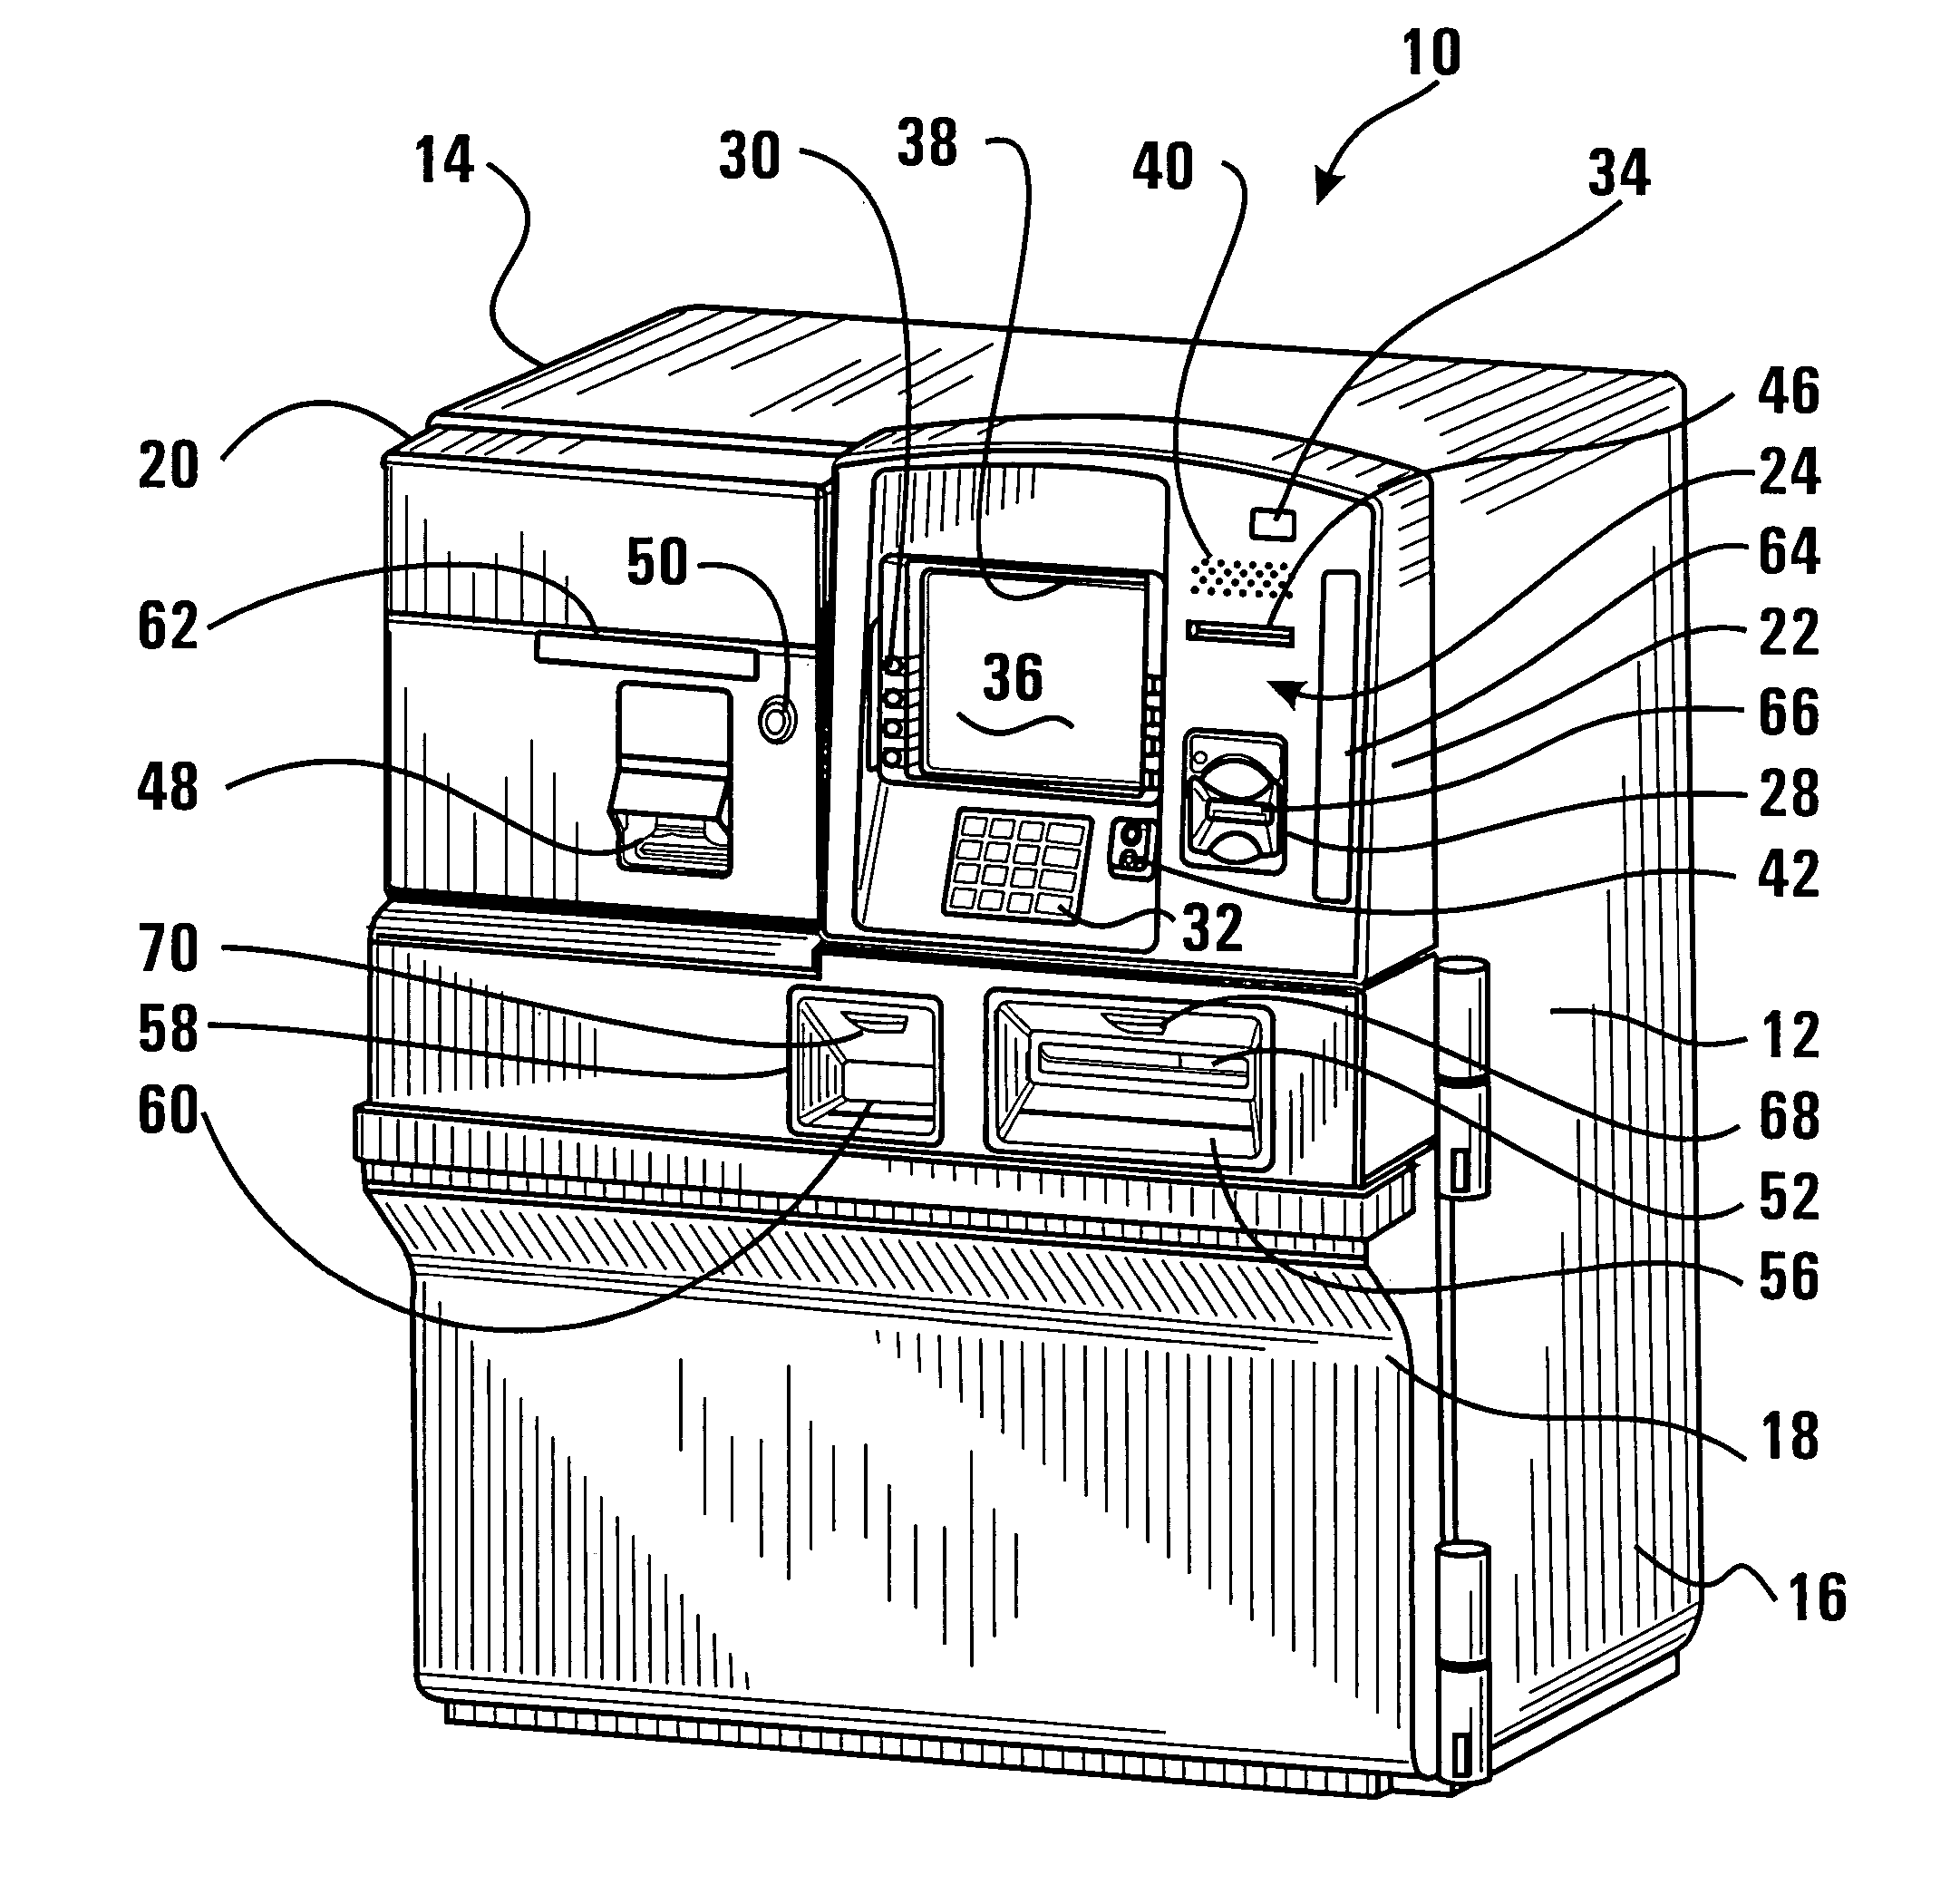 Cash dispensing automated banking machine diagnostic system